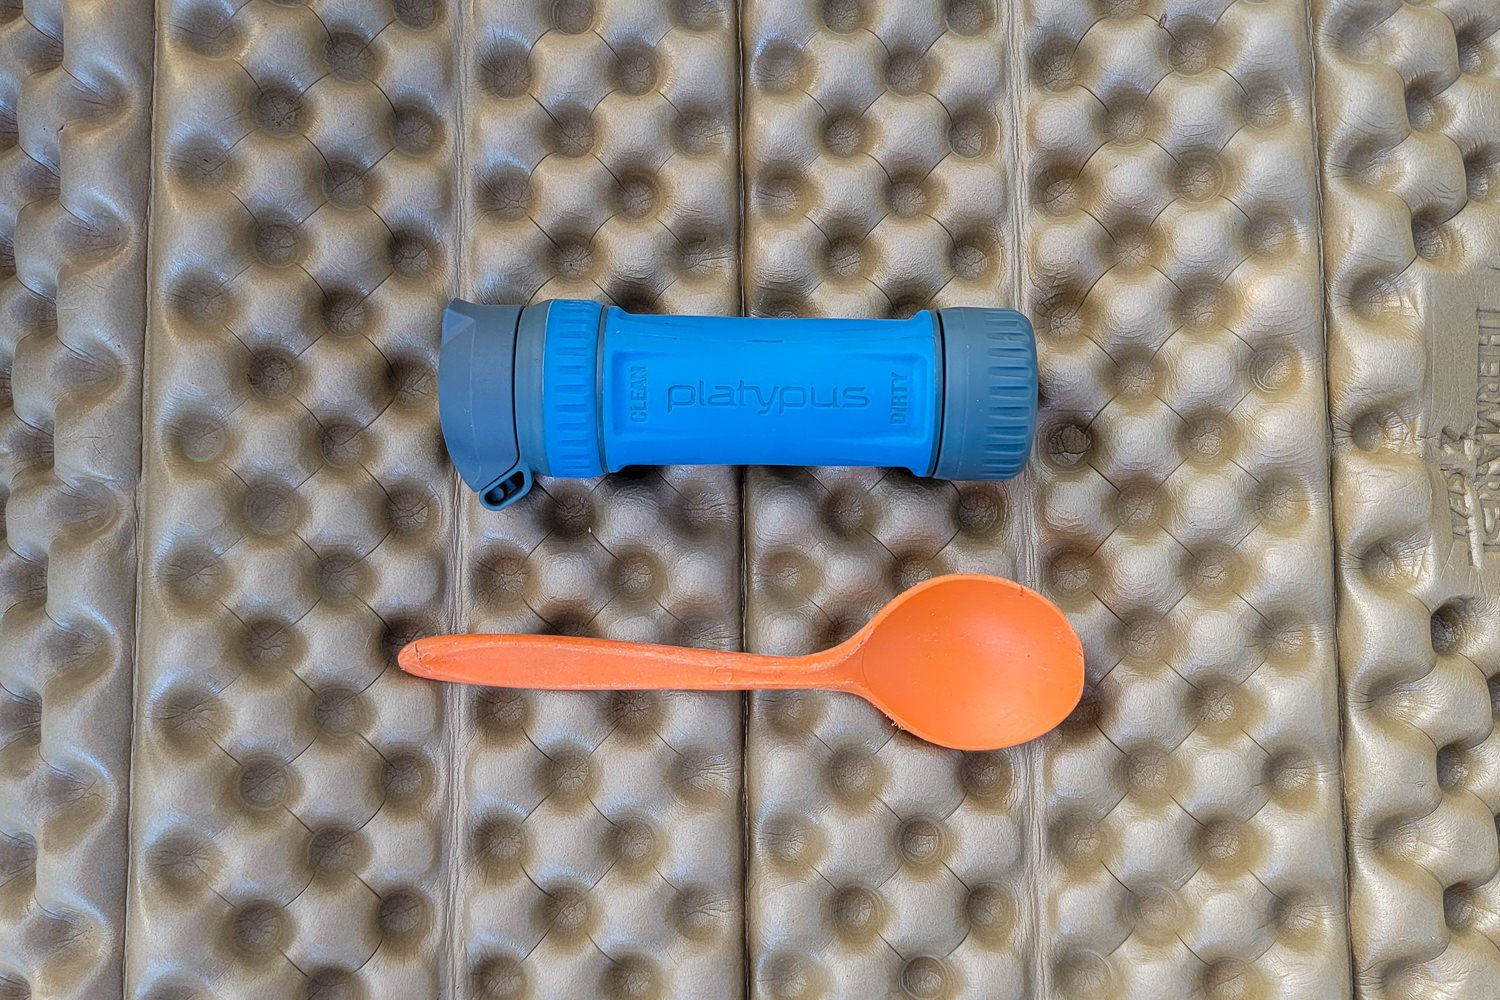 Top-down view of the Platypus QuickDraw next to a backpacking spoon for size